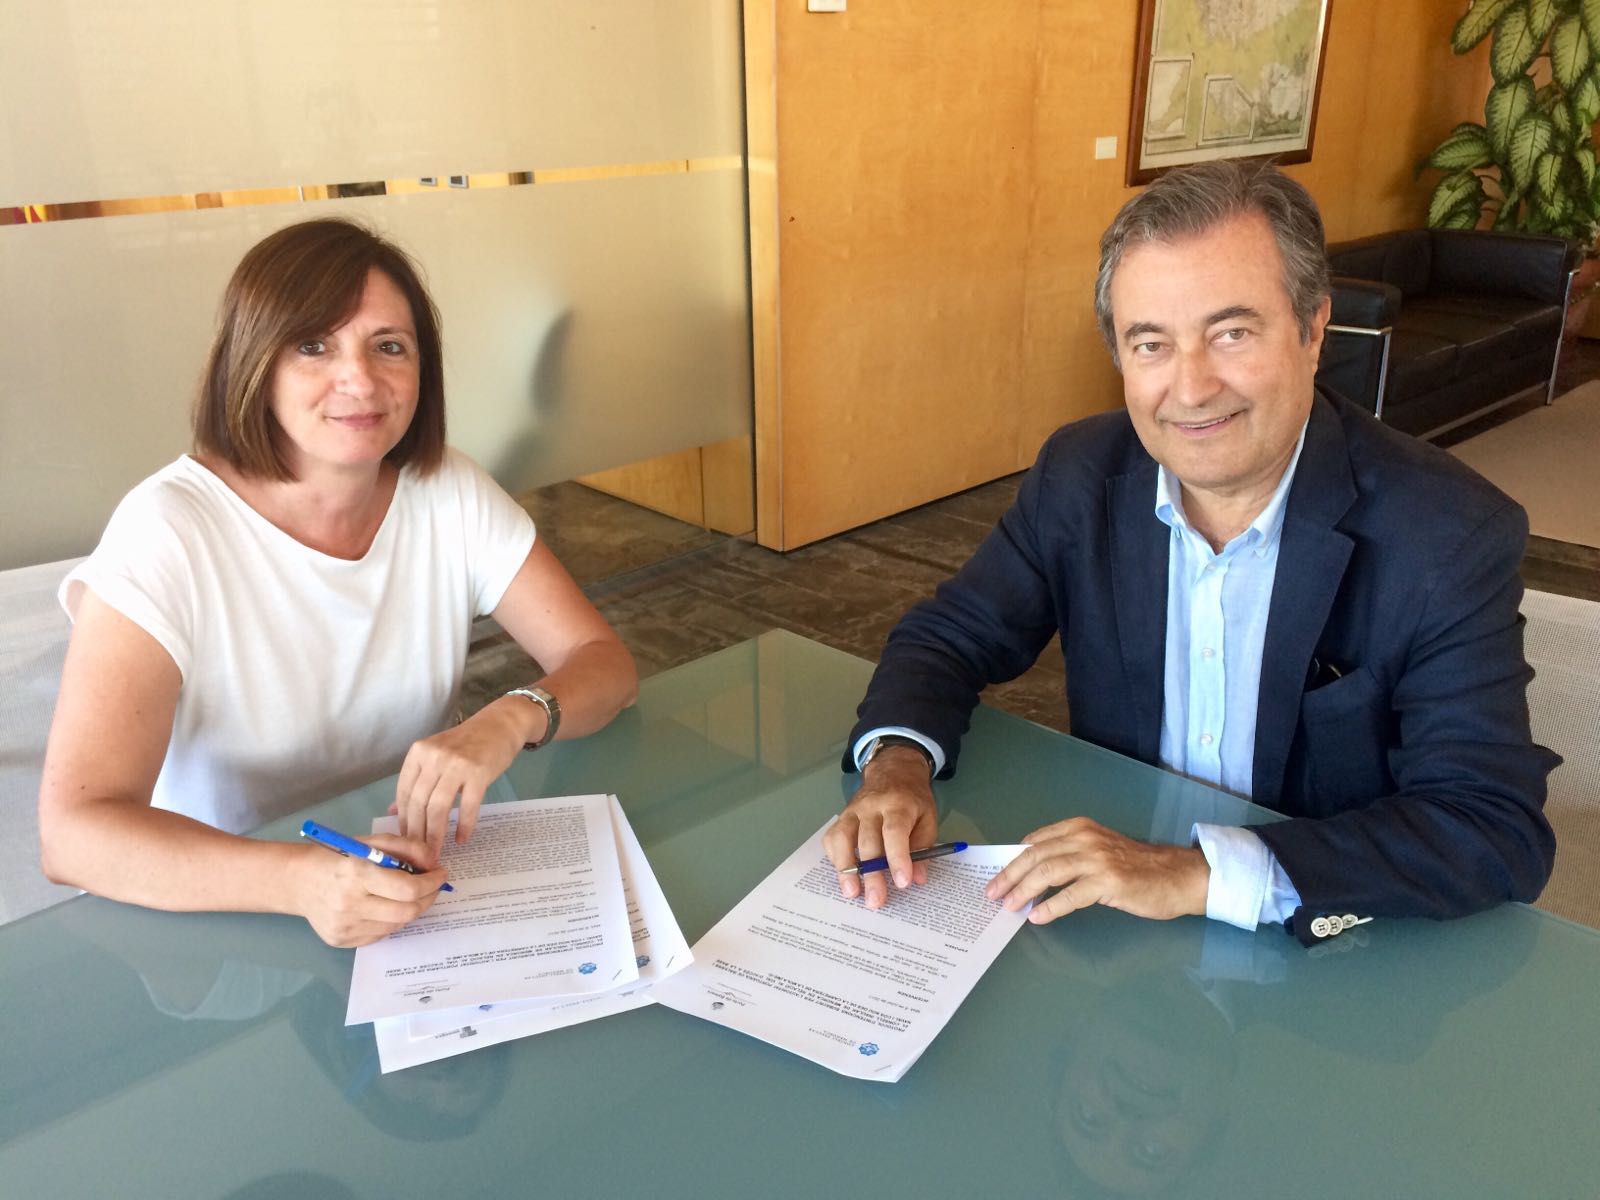 Menorca Island Council and the Port Authority of the Balearic Islands sign memorandum of understanding on the Cós Nou access road from the La Mola highway